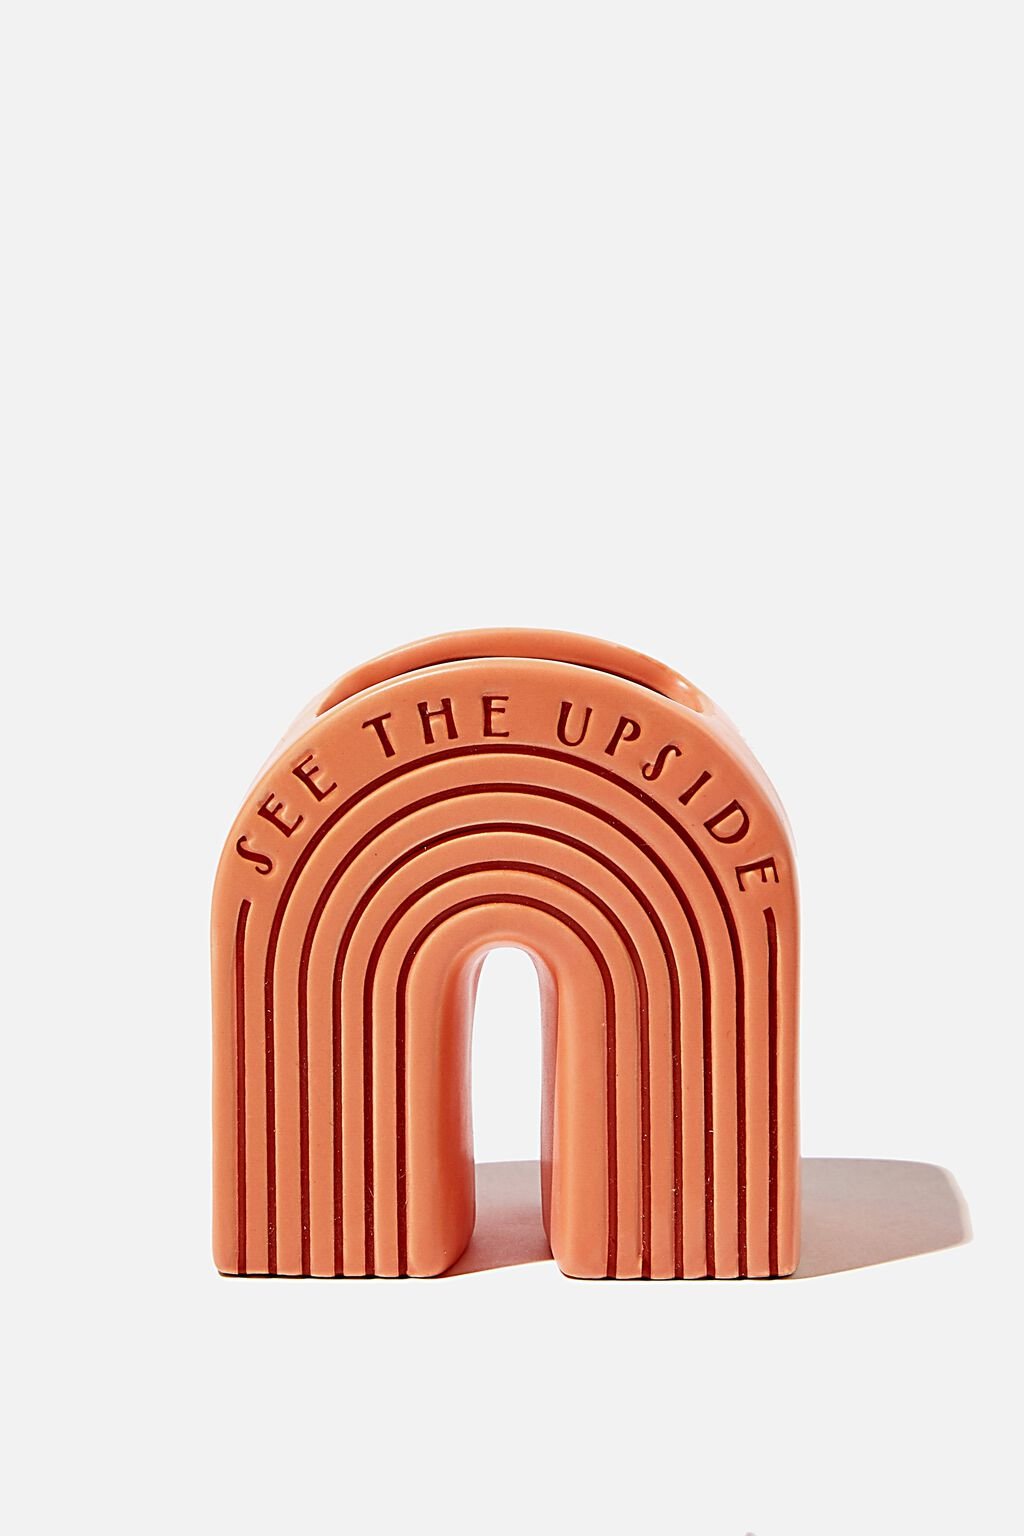 See the Upside Pen Holder by Typo